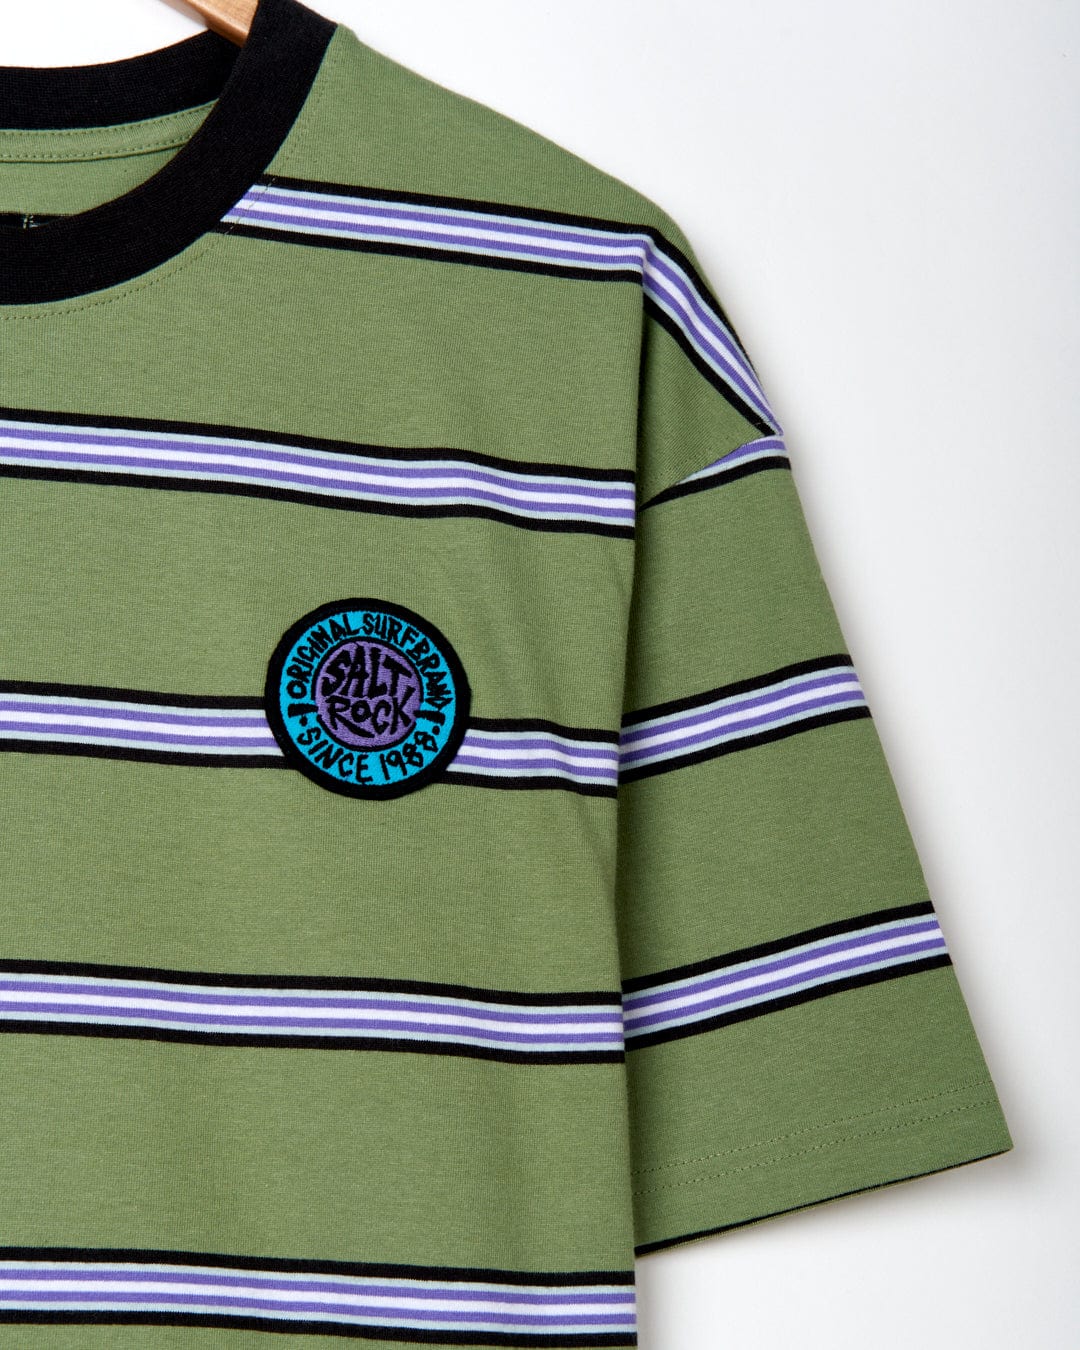 Saltrock SR Original - Mens Short Sleeve T-Shirt - Green and black striped oversized fit t-shirt with a retro surf badge on the chest.